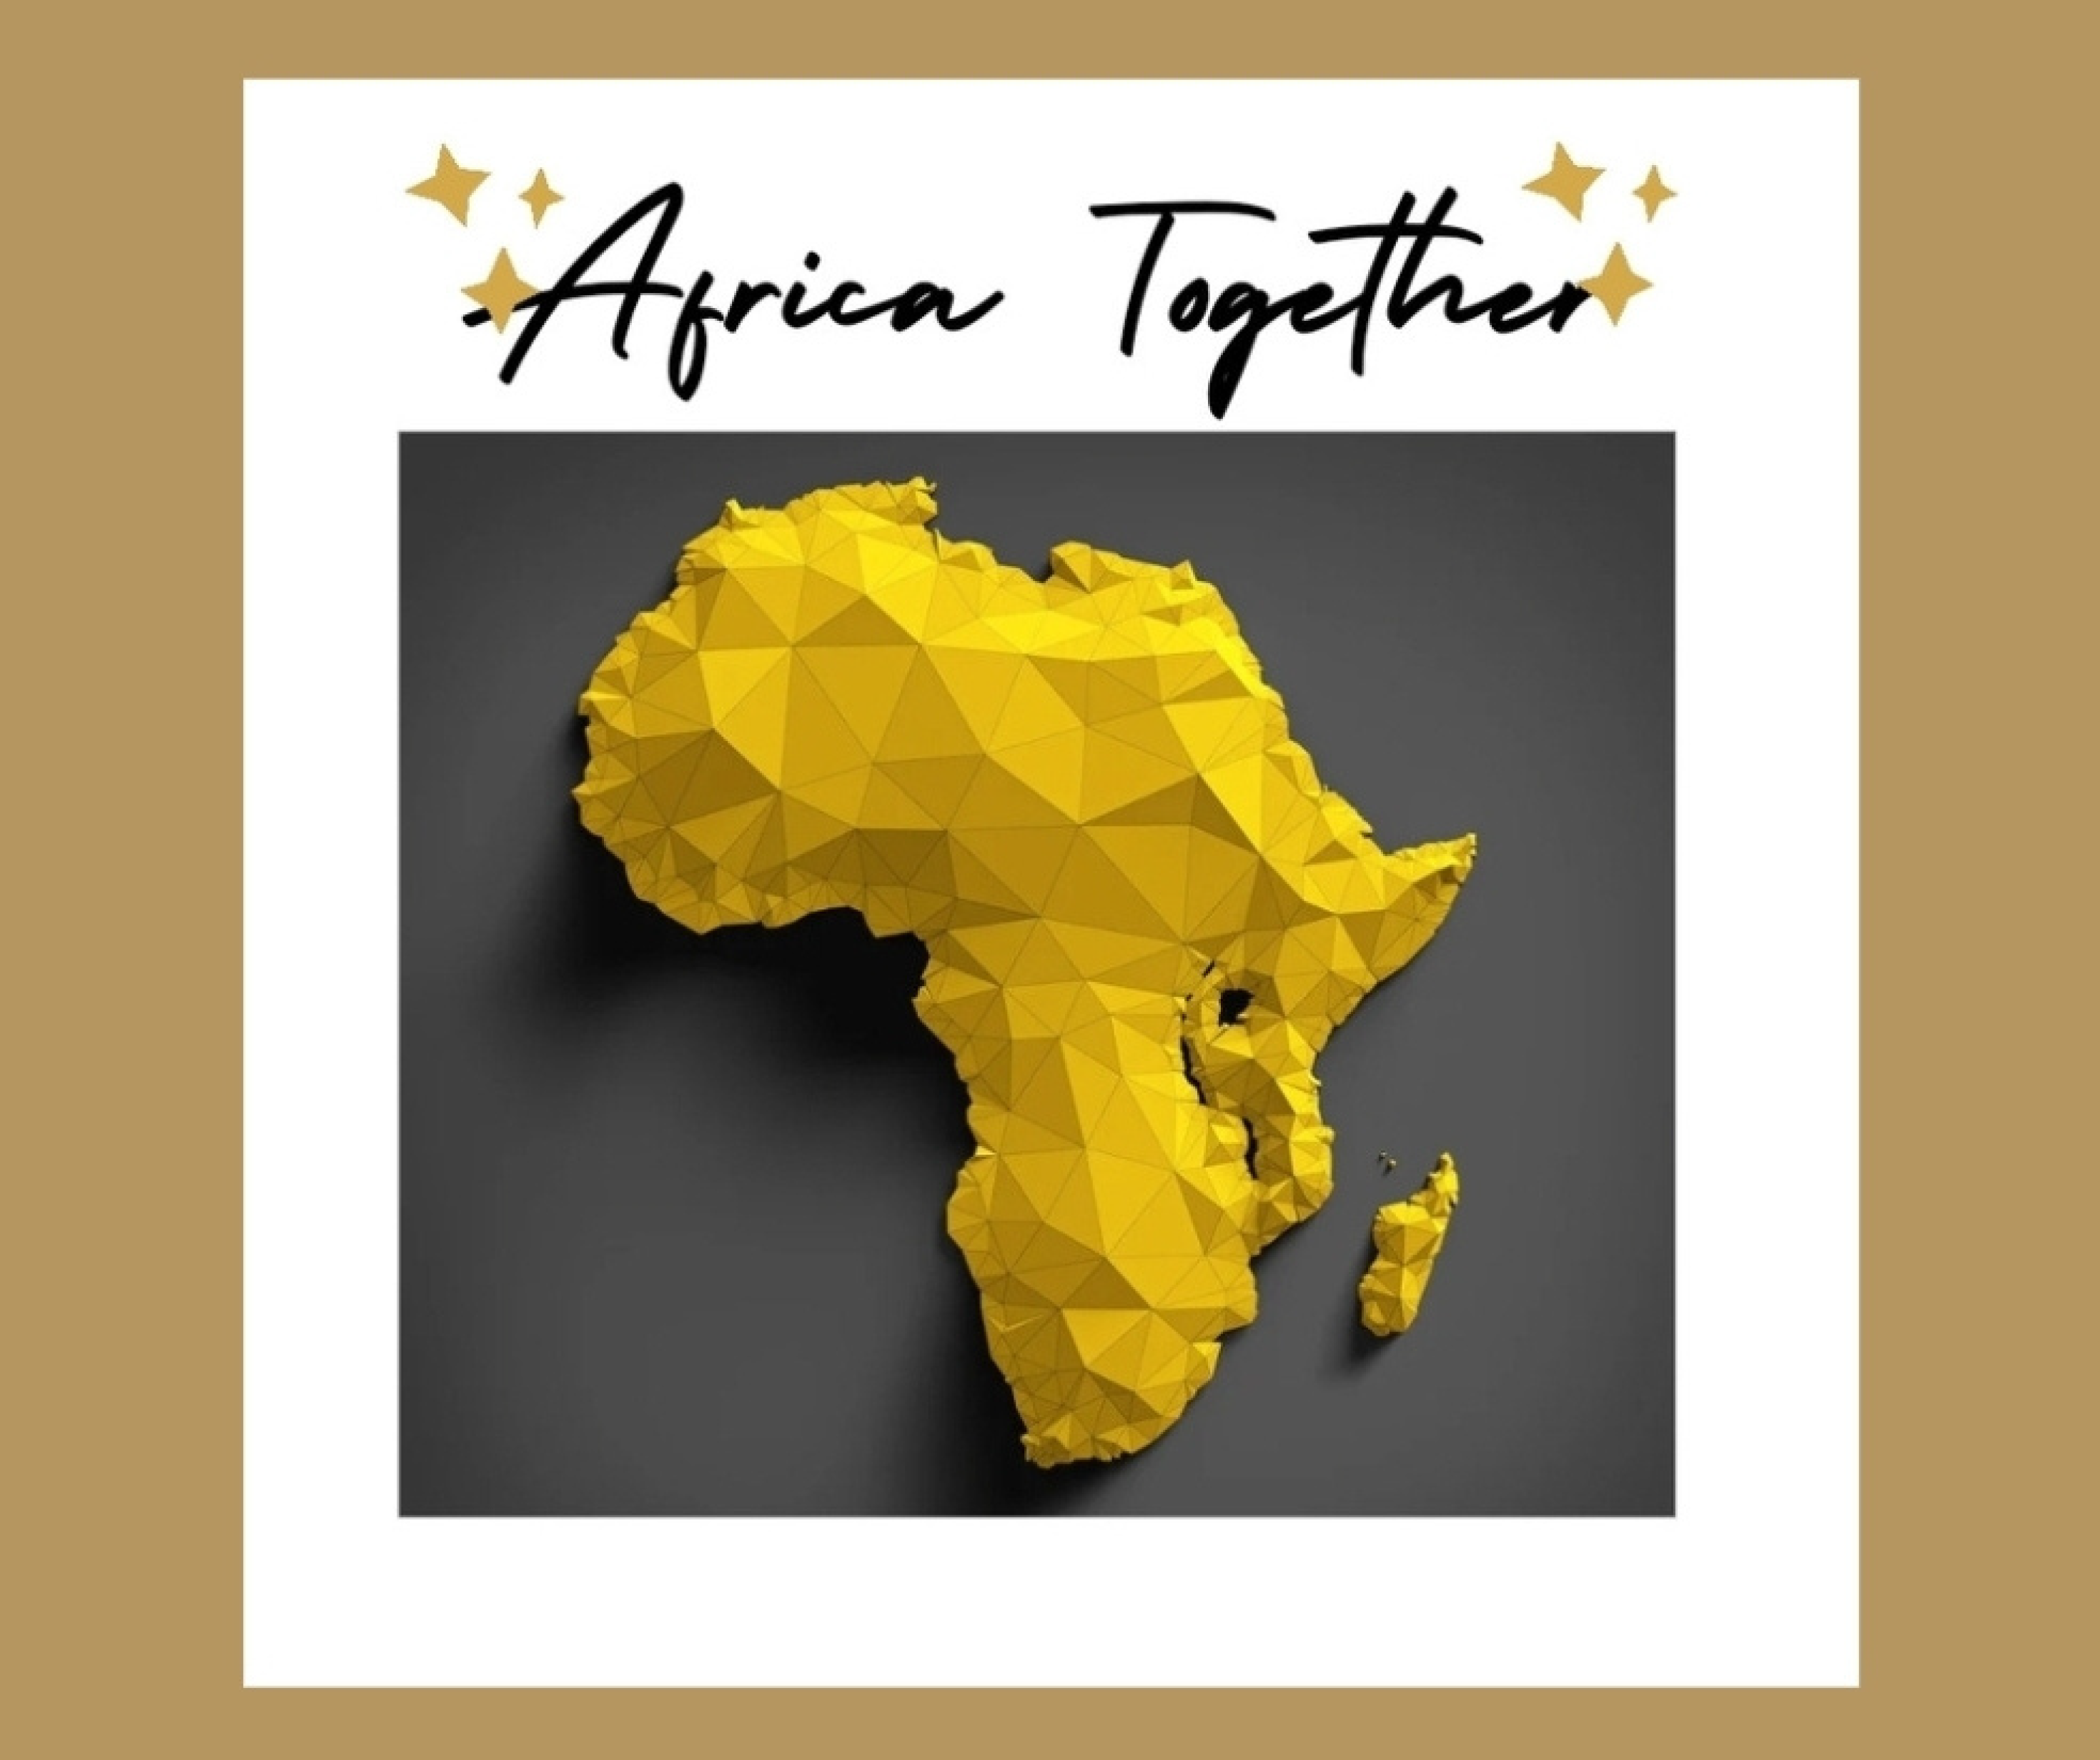 Africa Together 1 - AfricaTogether Christmas Party, 9th December 2022